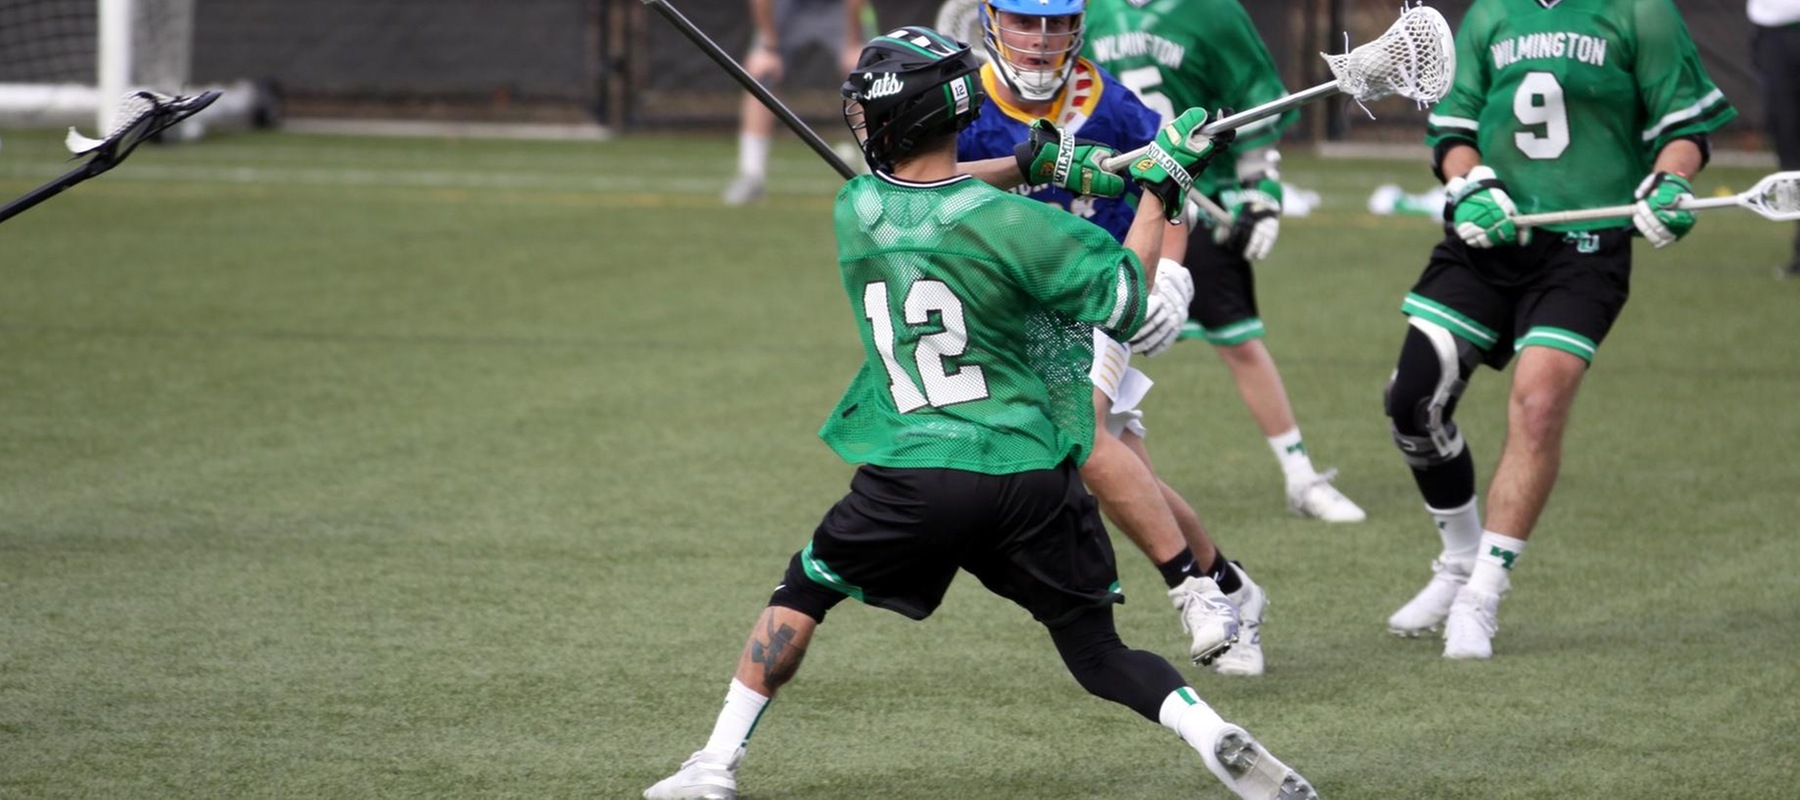 Copyright 2019; Wilmington University. All rights reserved. Photo of Chris Smith scoring a goal in the fourth quarter against SUNY Poly. Photo by Katlynne Tubo. March 15, 2019 vs. SUNY Poly.